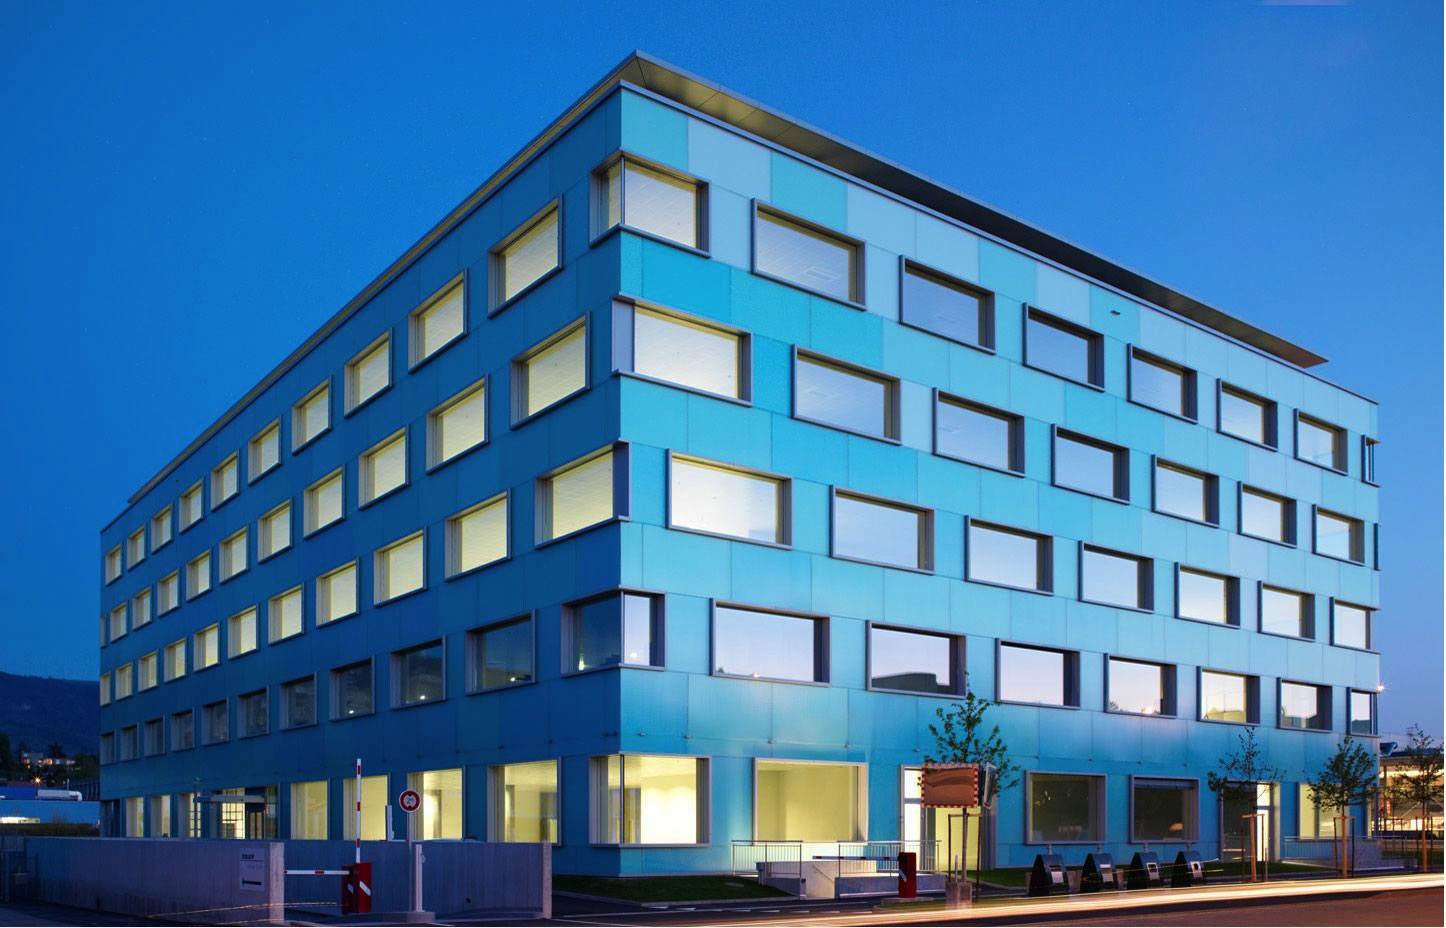 Picture of ProtonMail's 5 story teal office building in Geneva.